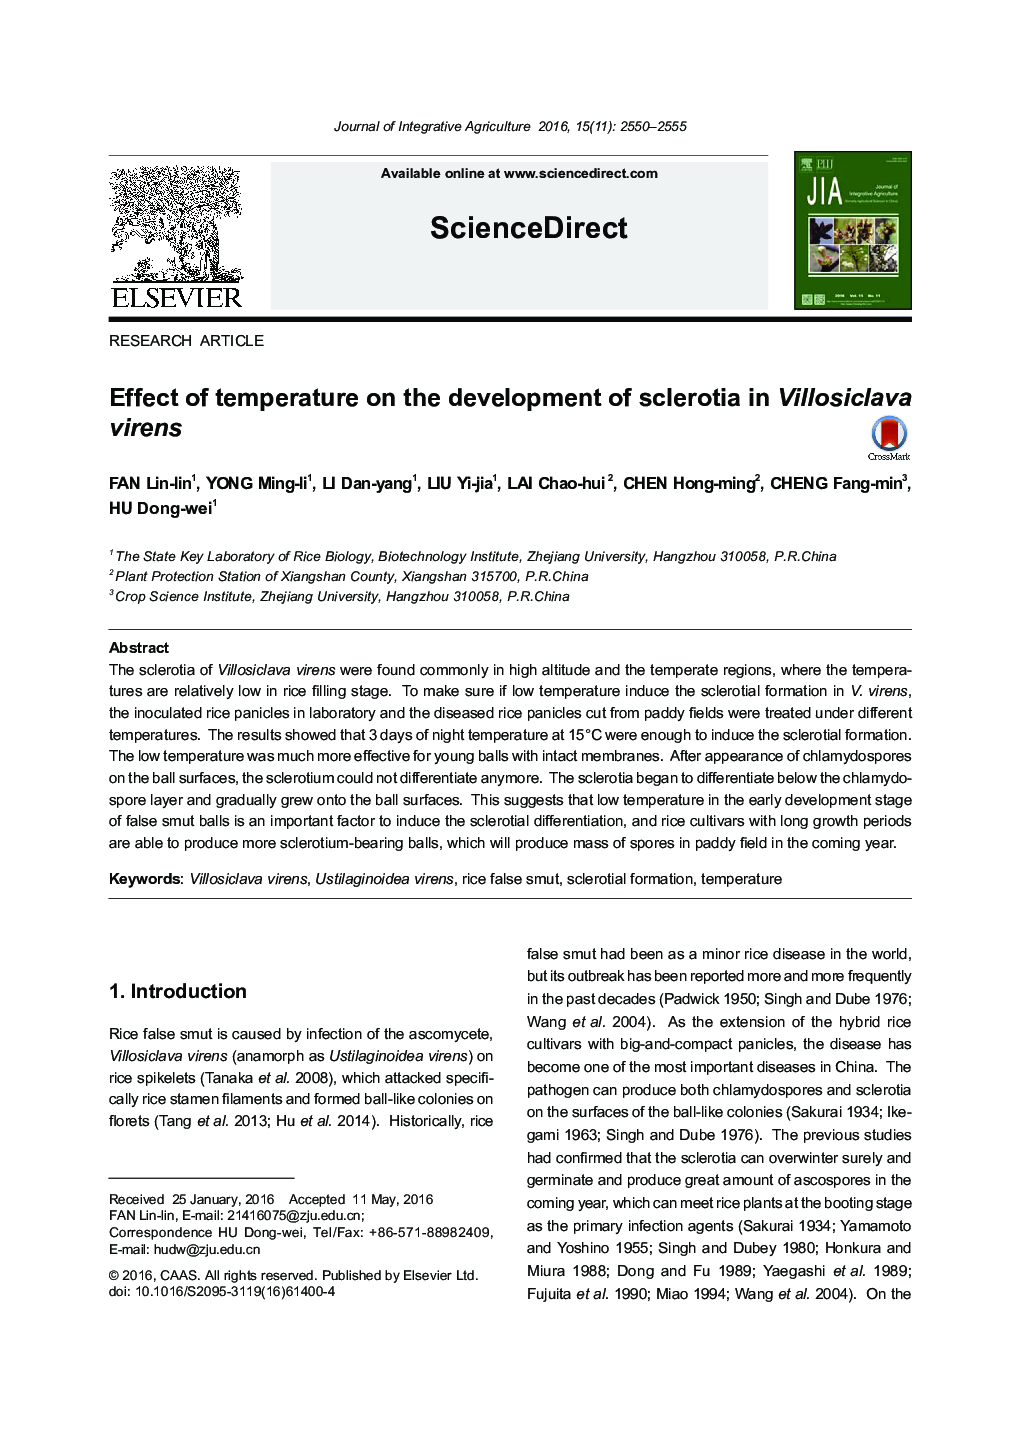 Effect of temperature on the development of sclerotia in Villosiclava virens